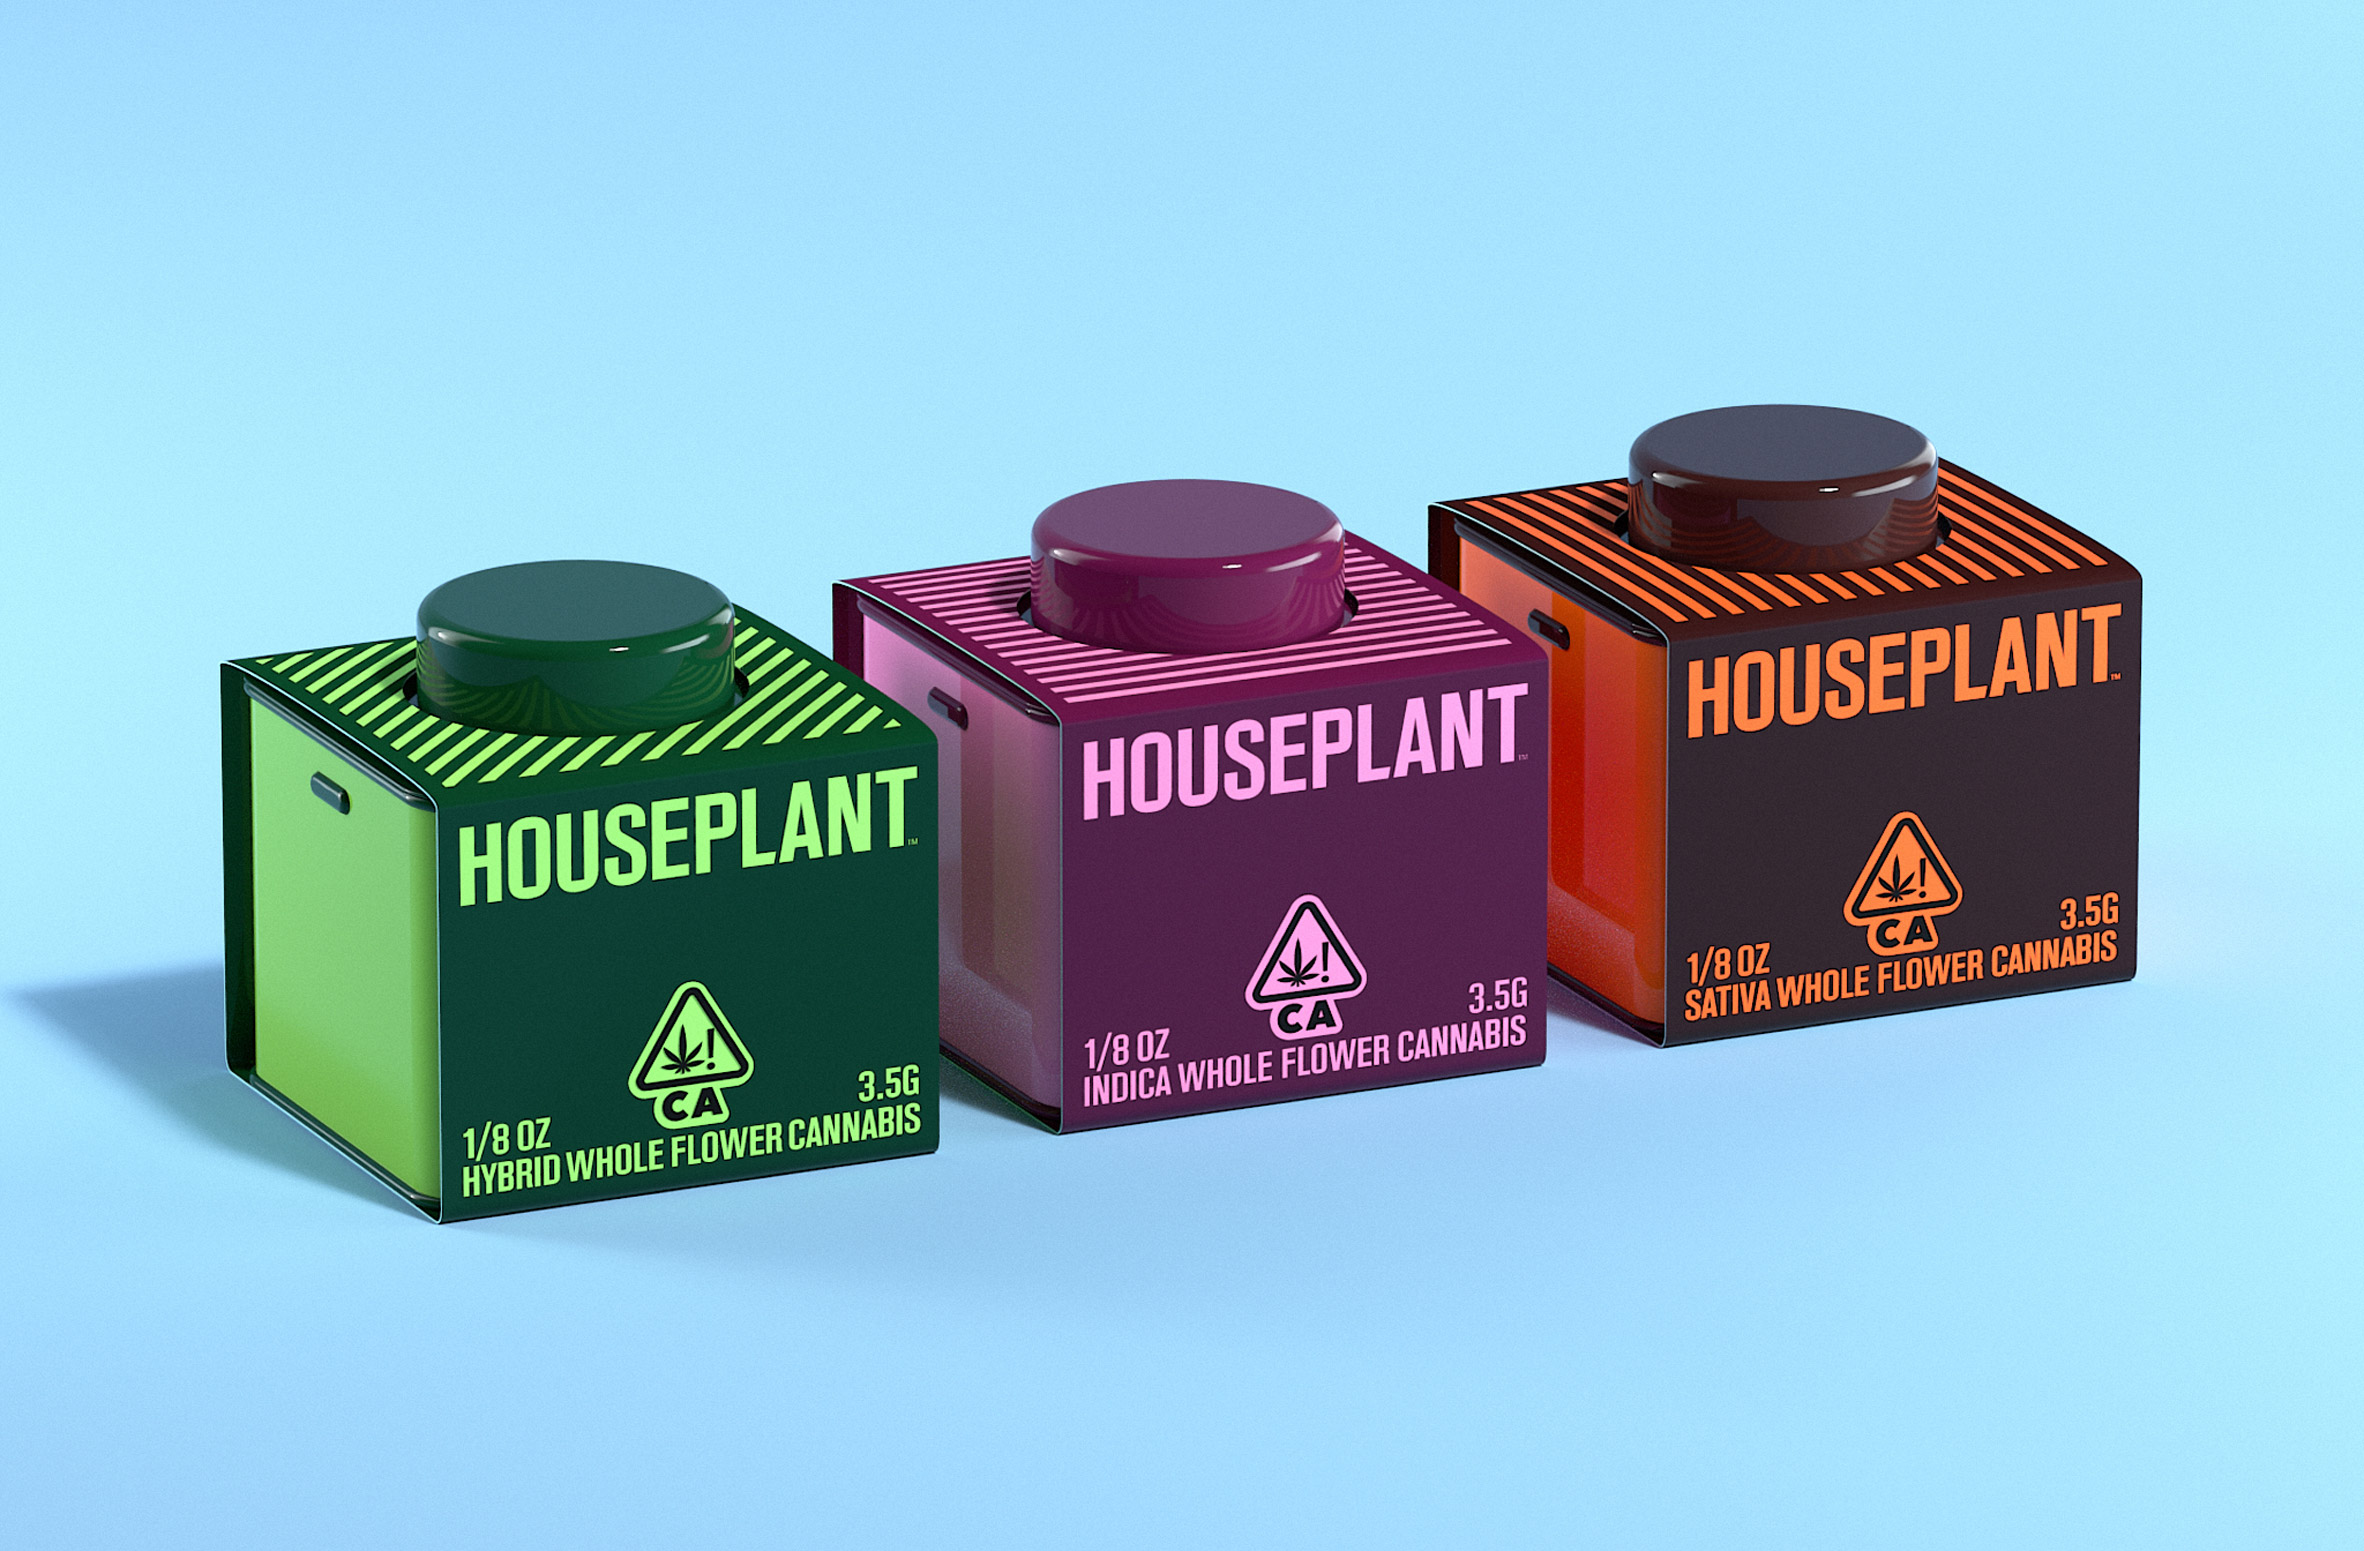 Three Houseplant cannabis containers in green pink and orange against a blue background